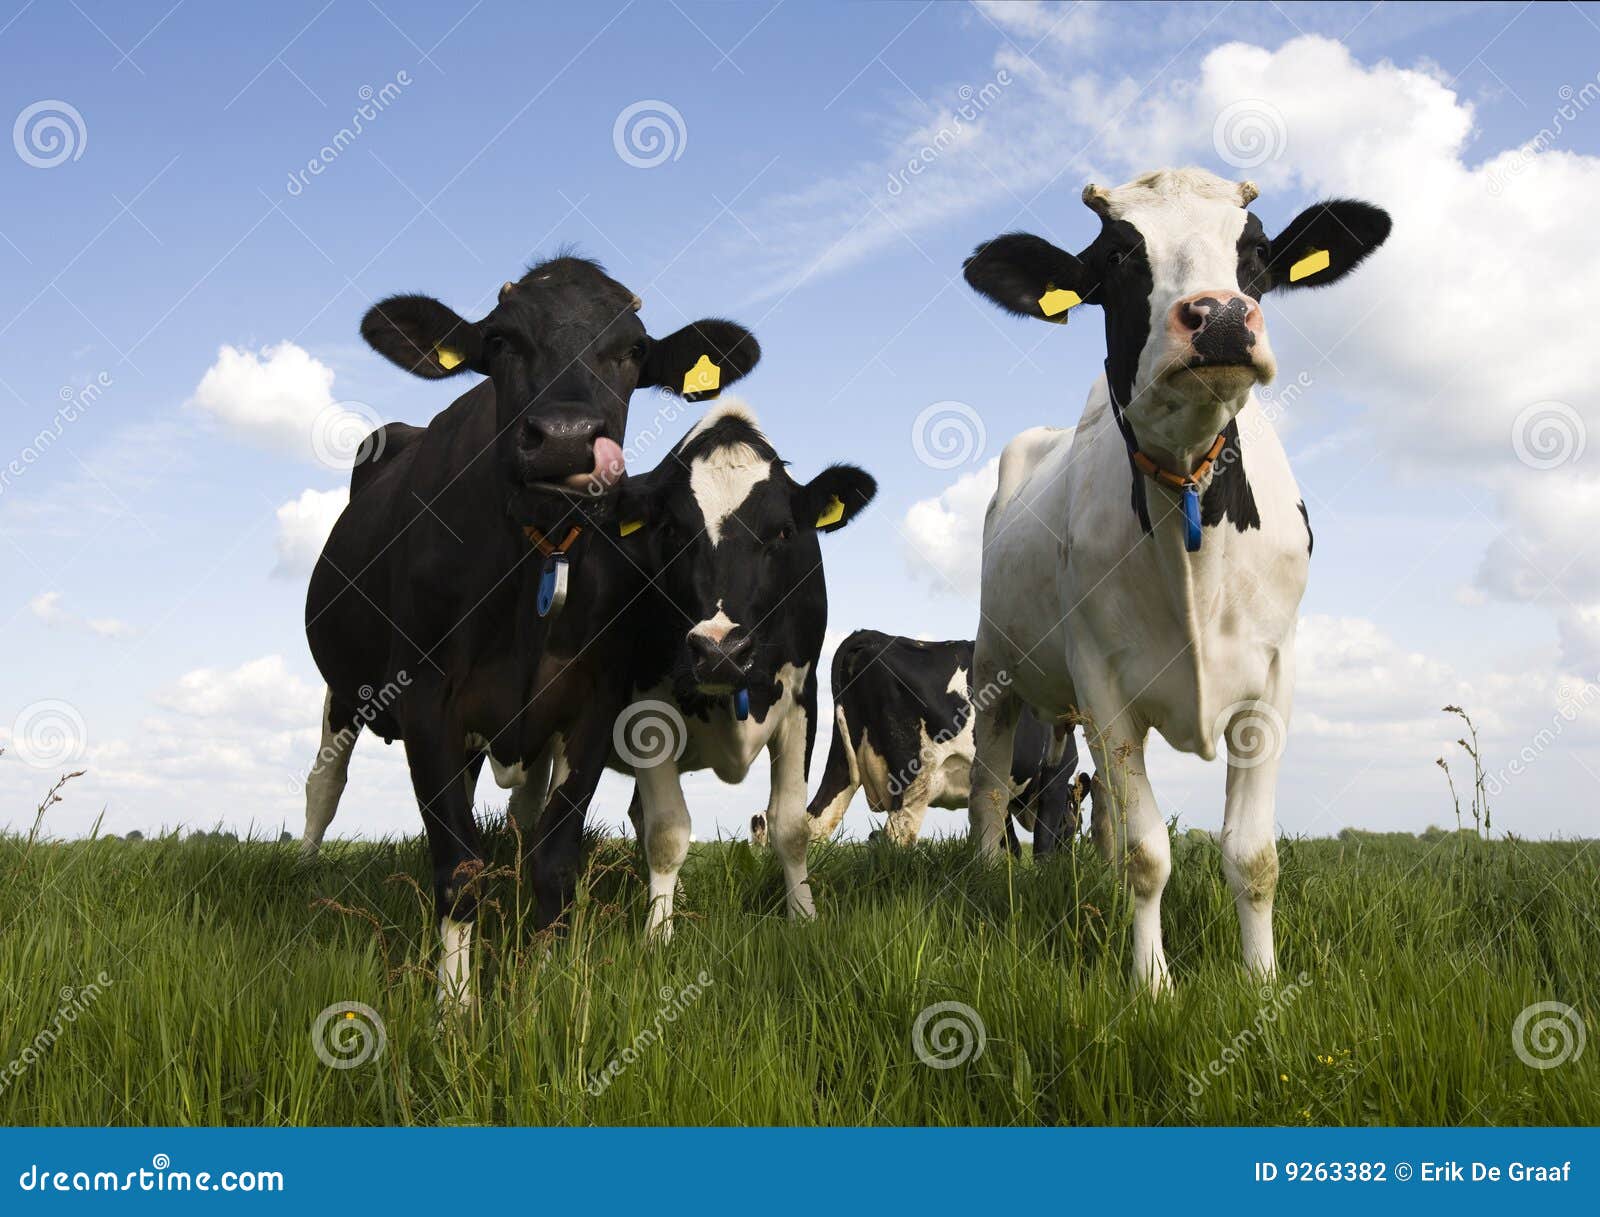 Dutch cows stock photo. Image of country, meadow, animal - 9263382